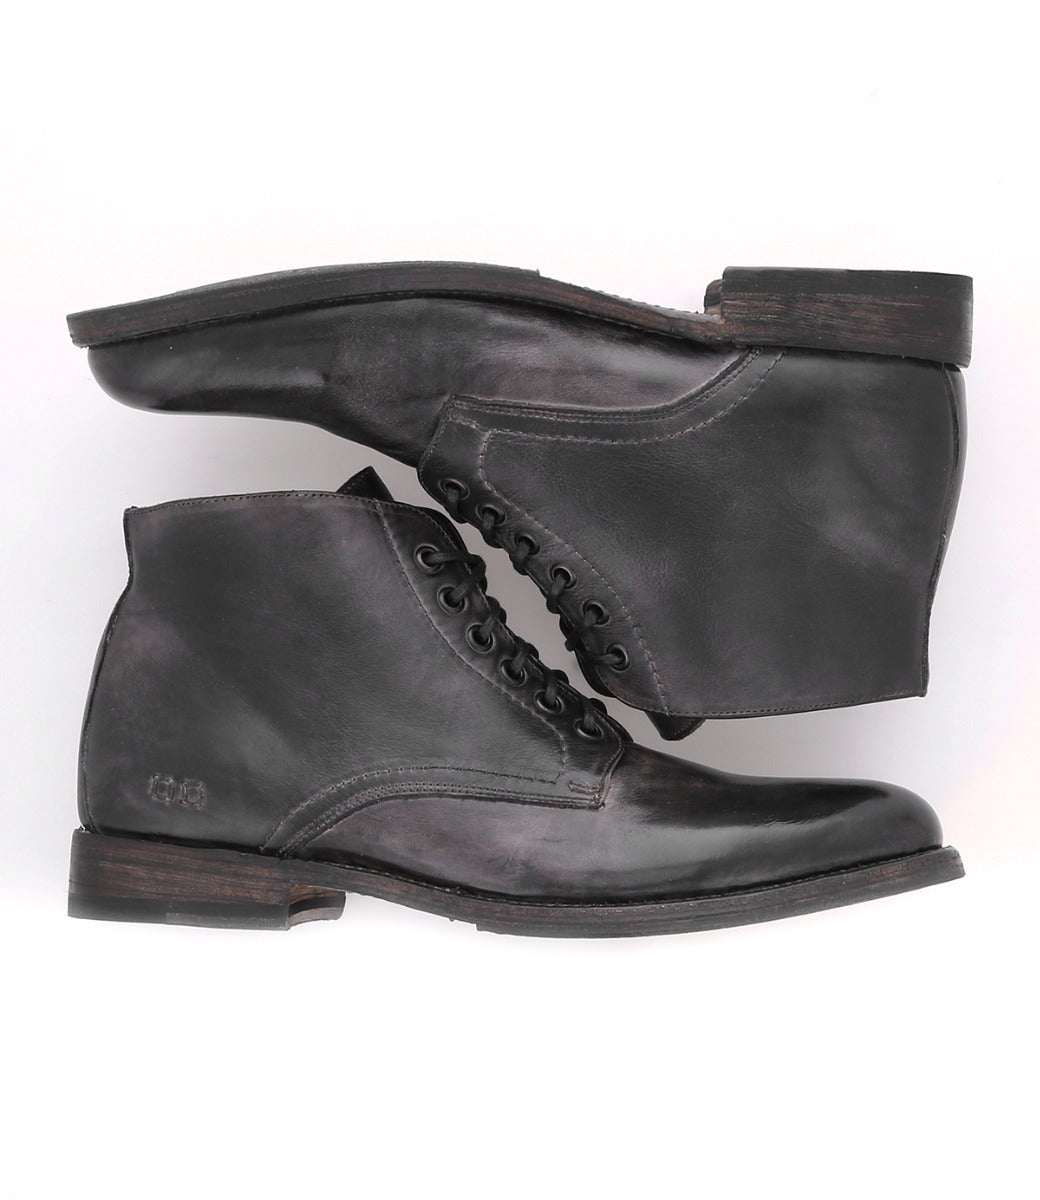 A pair of Bed Stu Bradley Black Rustic boots, featuring a cushioned insole, displayed against a white background.